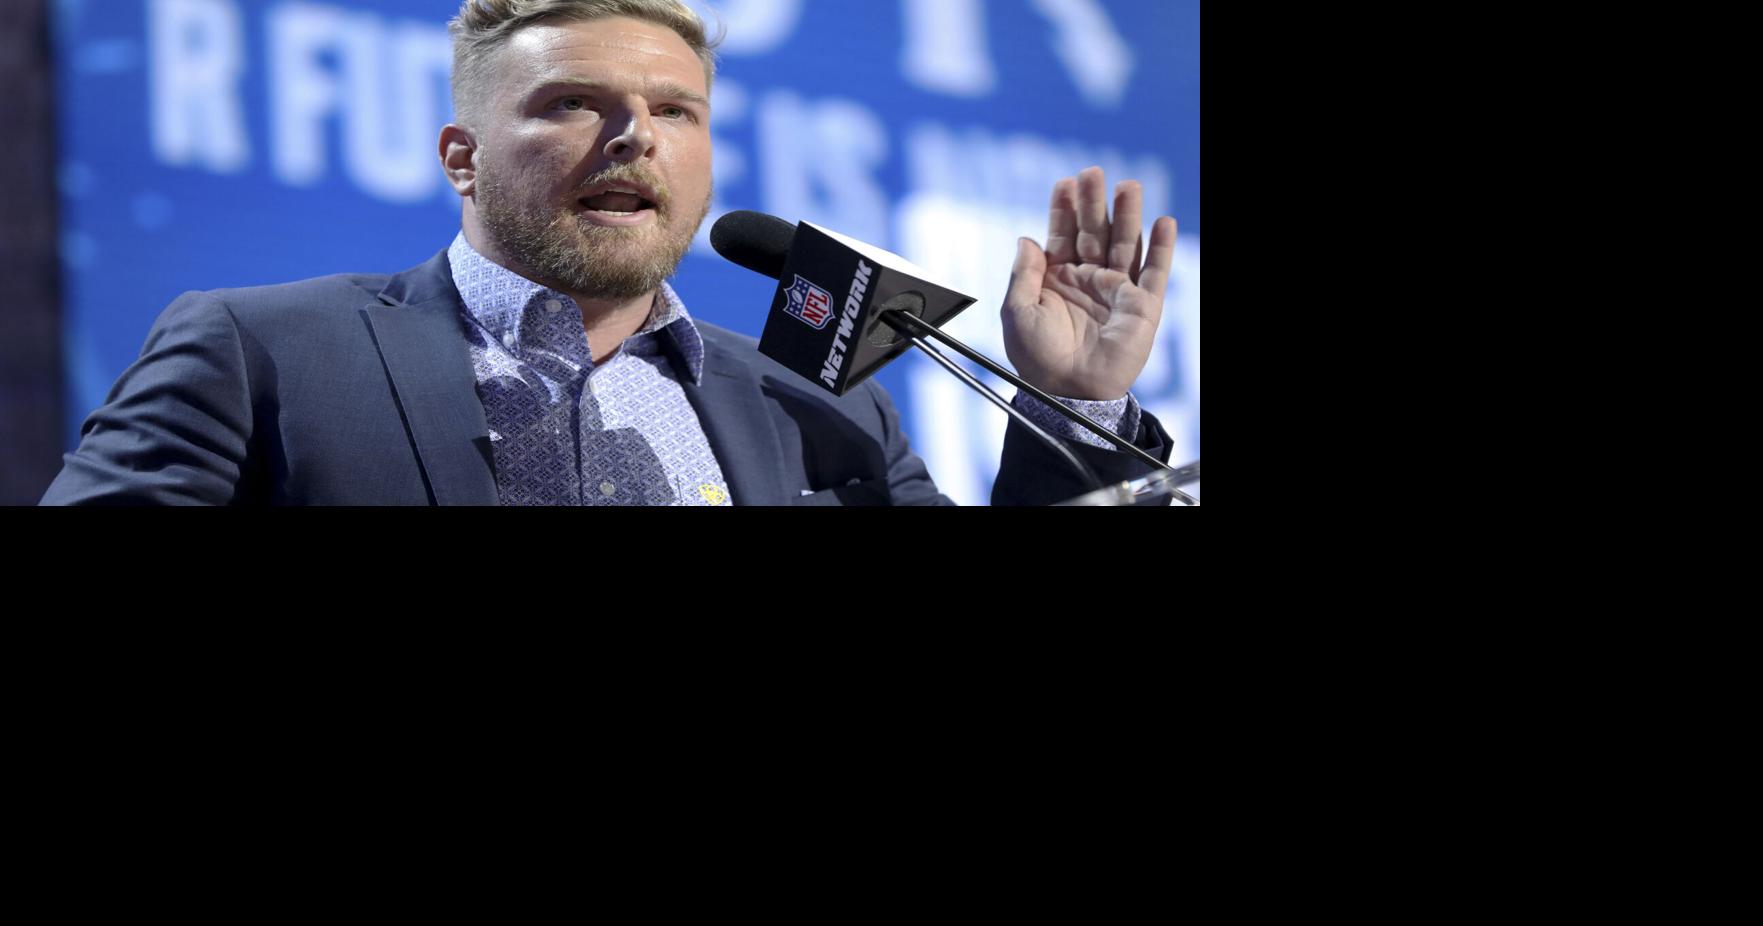 ESPN 'College GameDay' host Pat McAfee fires back at WSU: 'Sick